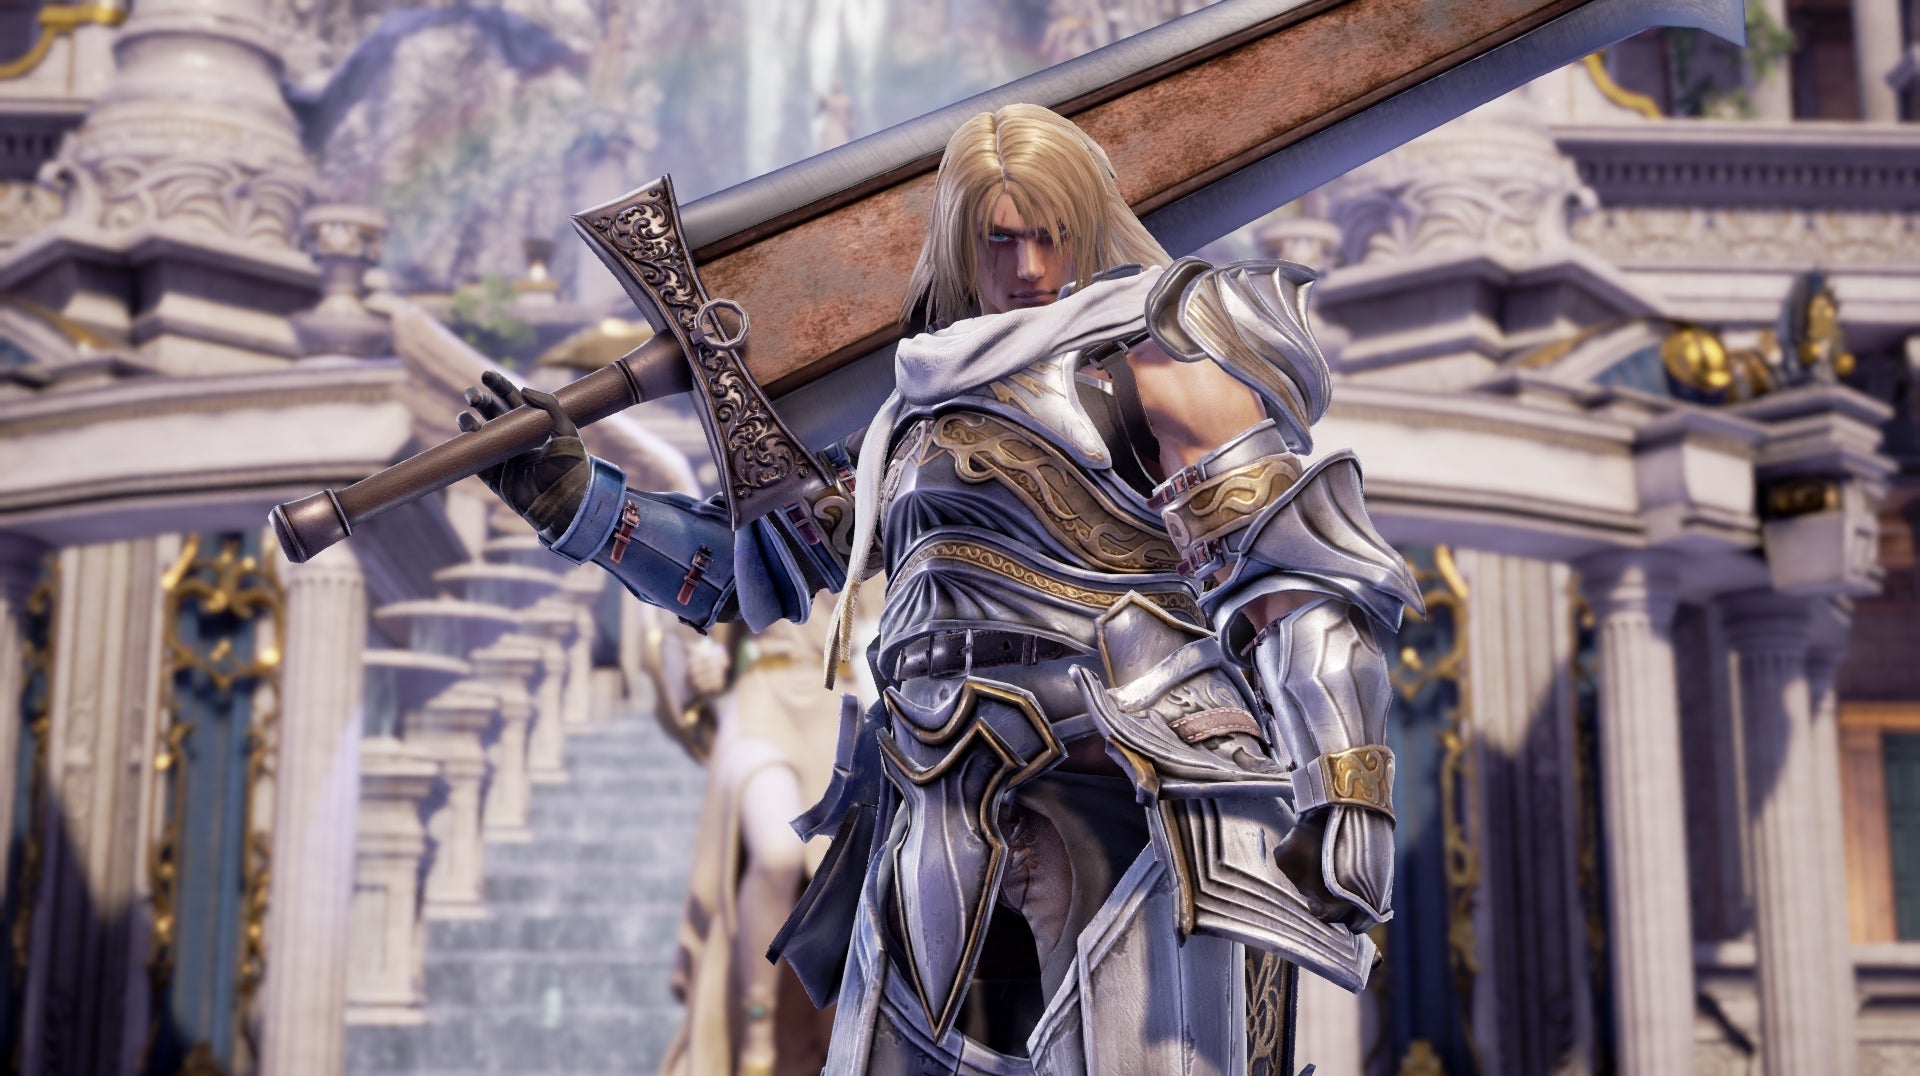 heres-siegfried-and-his-massive-sword-in-soulcalibur-6-1523612710892.jpg